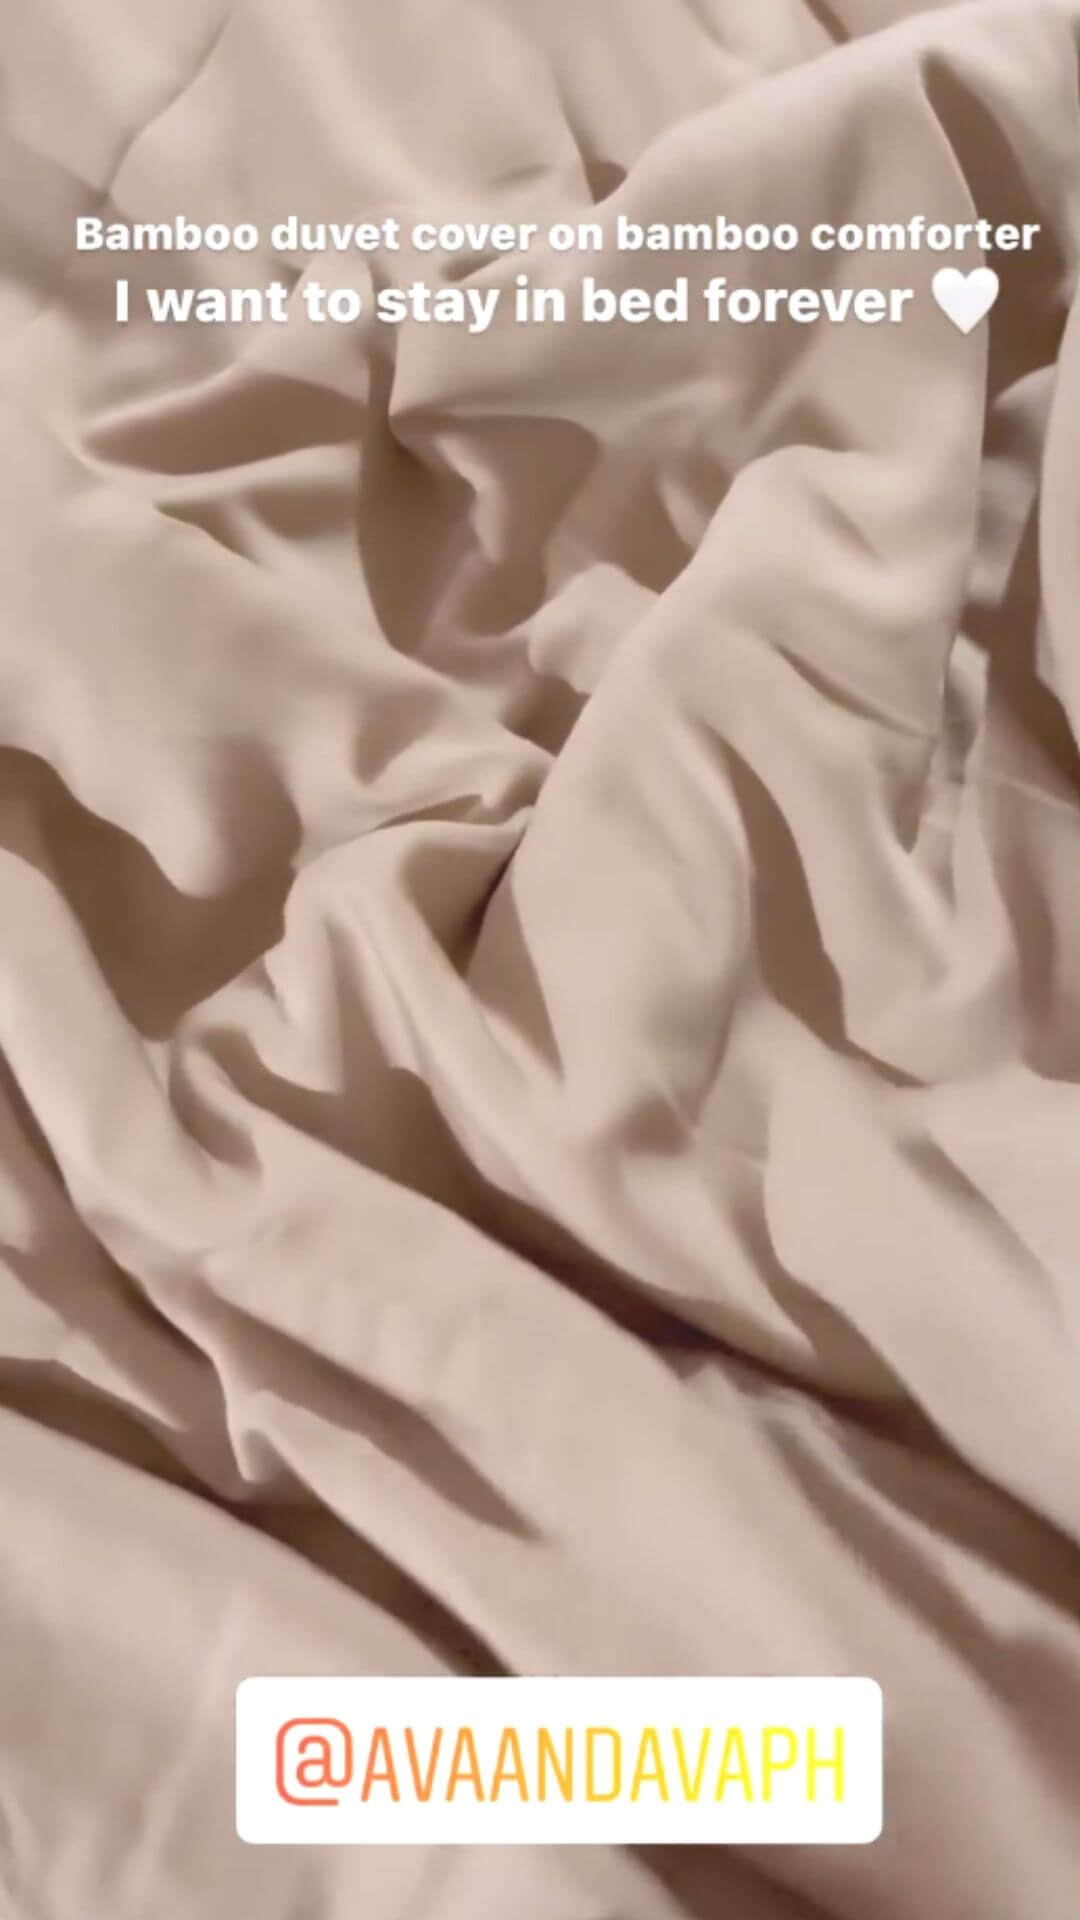 ava and ava review ph - cooling, buttery smooth and silky soft organic bamboo lyocell comforter inside duvet cover in sand beige with white piping, with handholes by jin loves to eat @jinlovestoeat